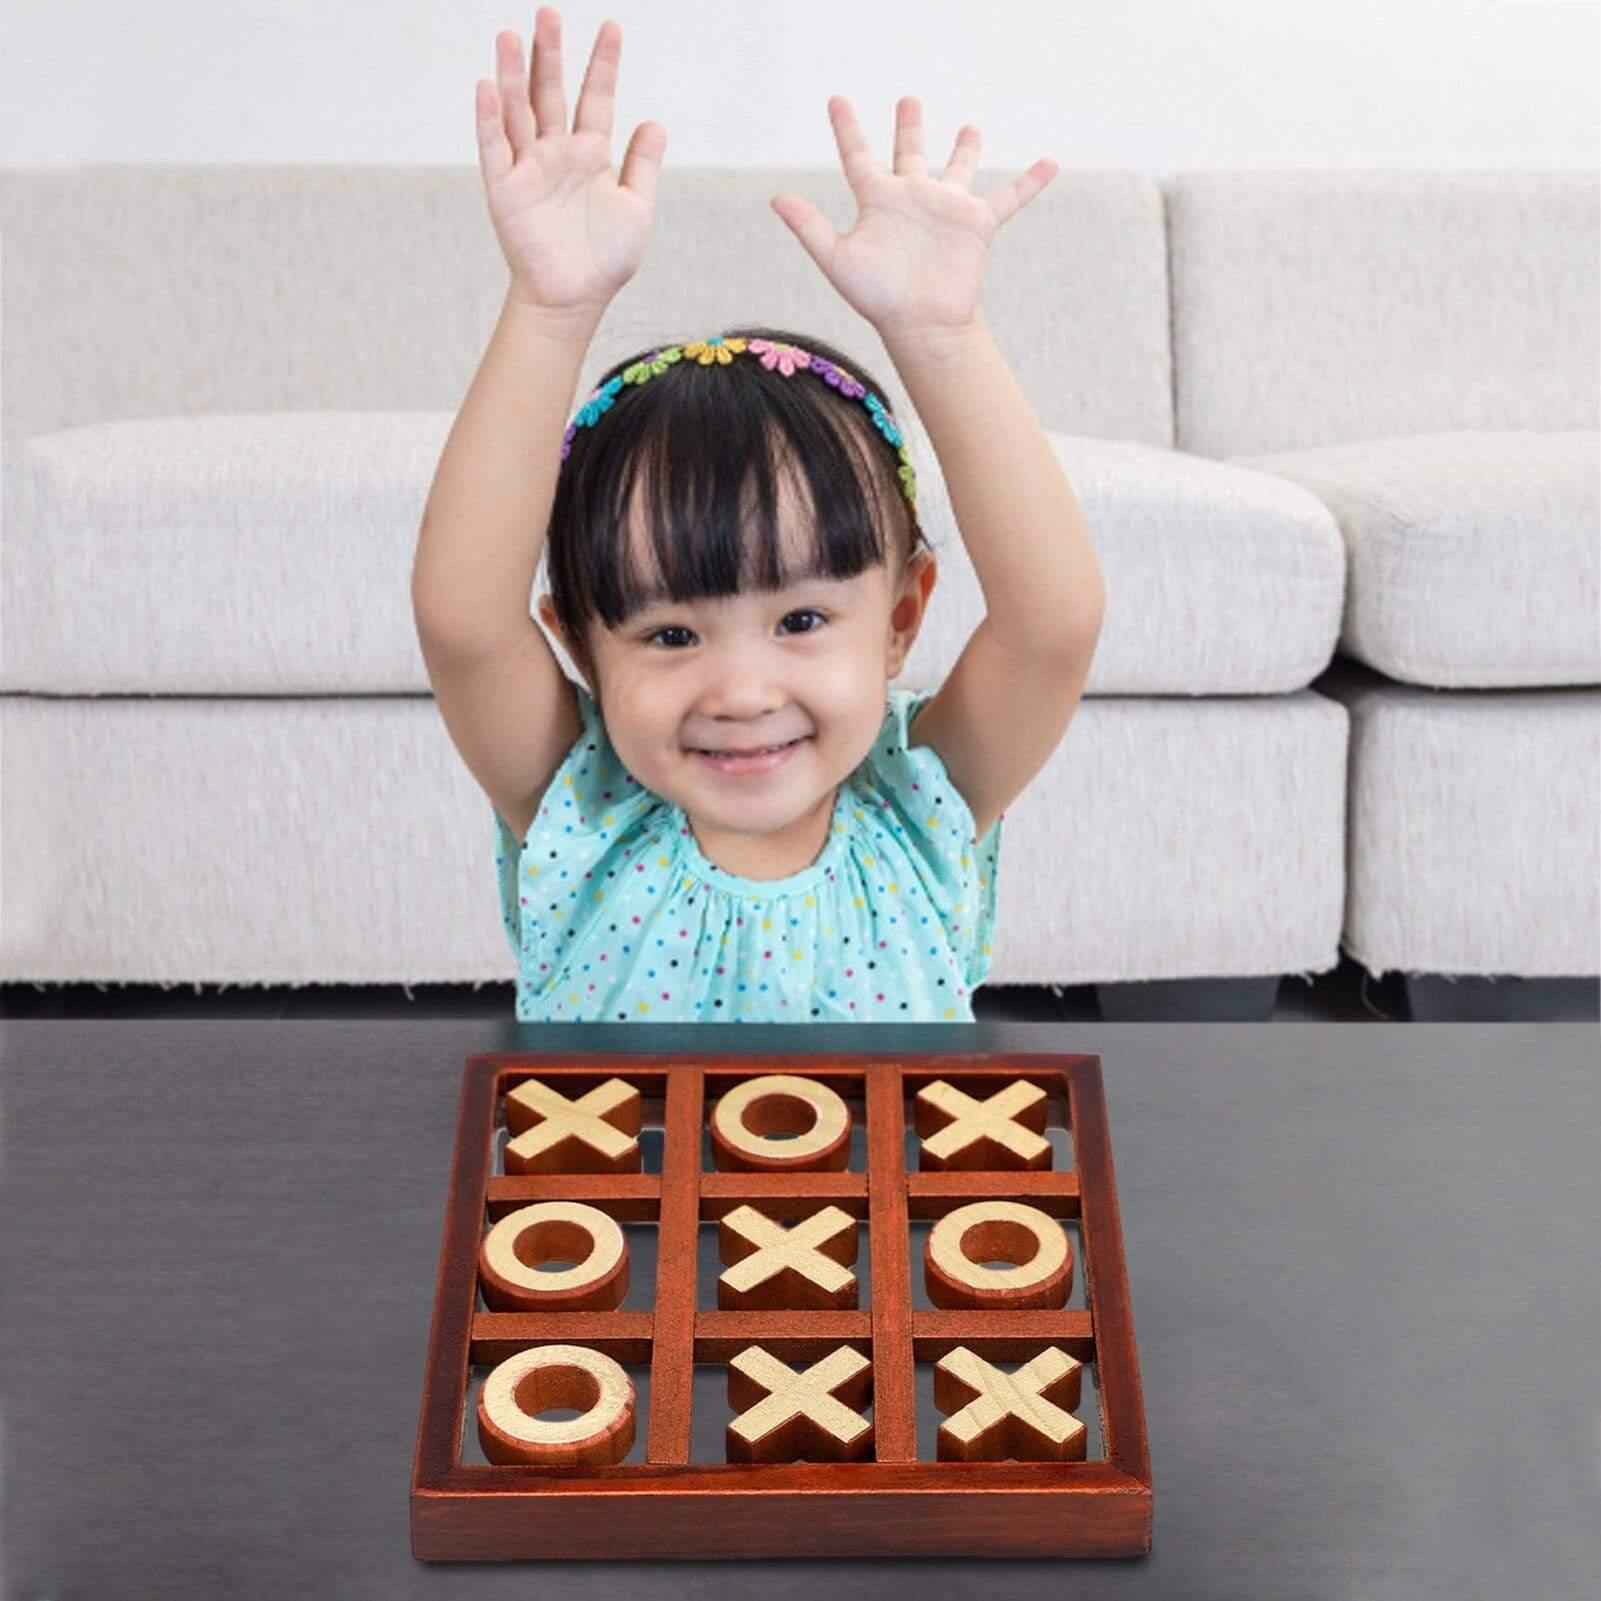 Shop 0 Brown wooden tic tac toe Wooden Tic Tac Toe Mademoiselle Home Decor